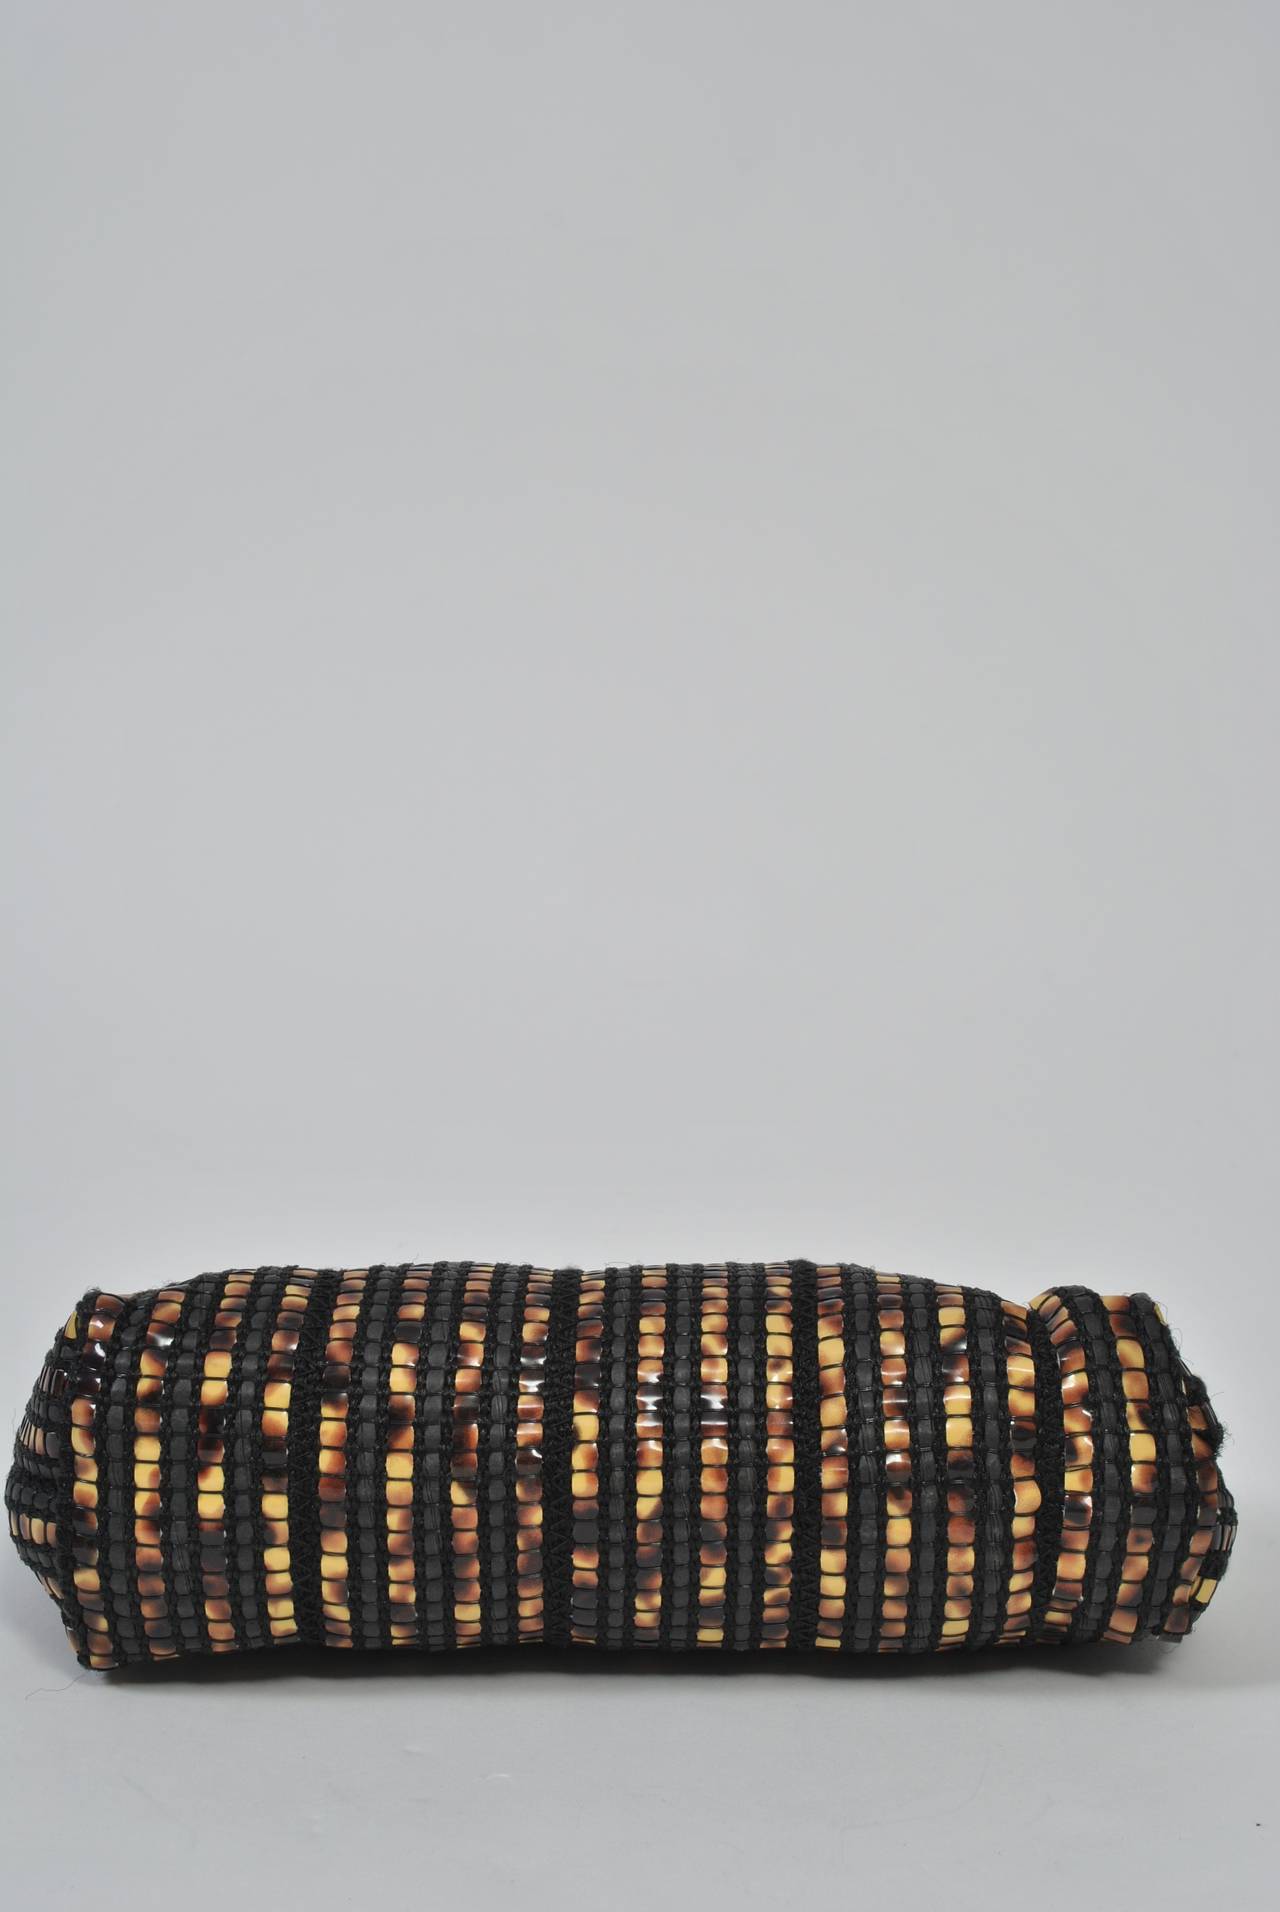 1970s clutch woven of mottled plastic strips resembling tortoise and with a plastic tortoise kiss frame. Interior is black taffeta. Made in Italy. These clutches were very popular during the 1970s, but this is a particularly interesting and unusual